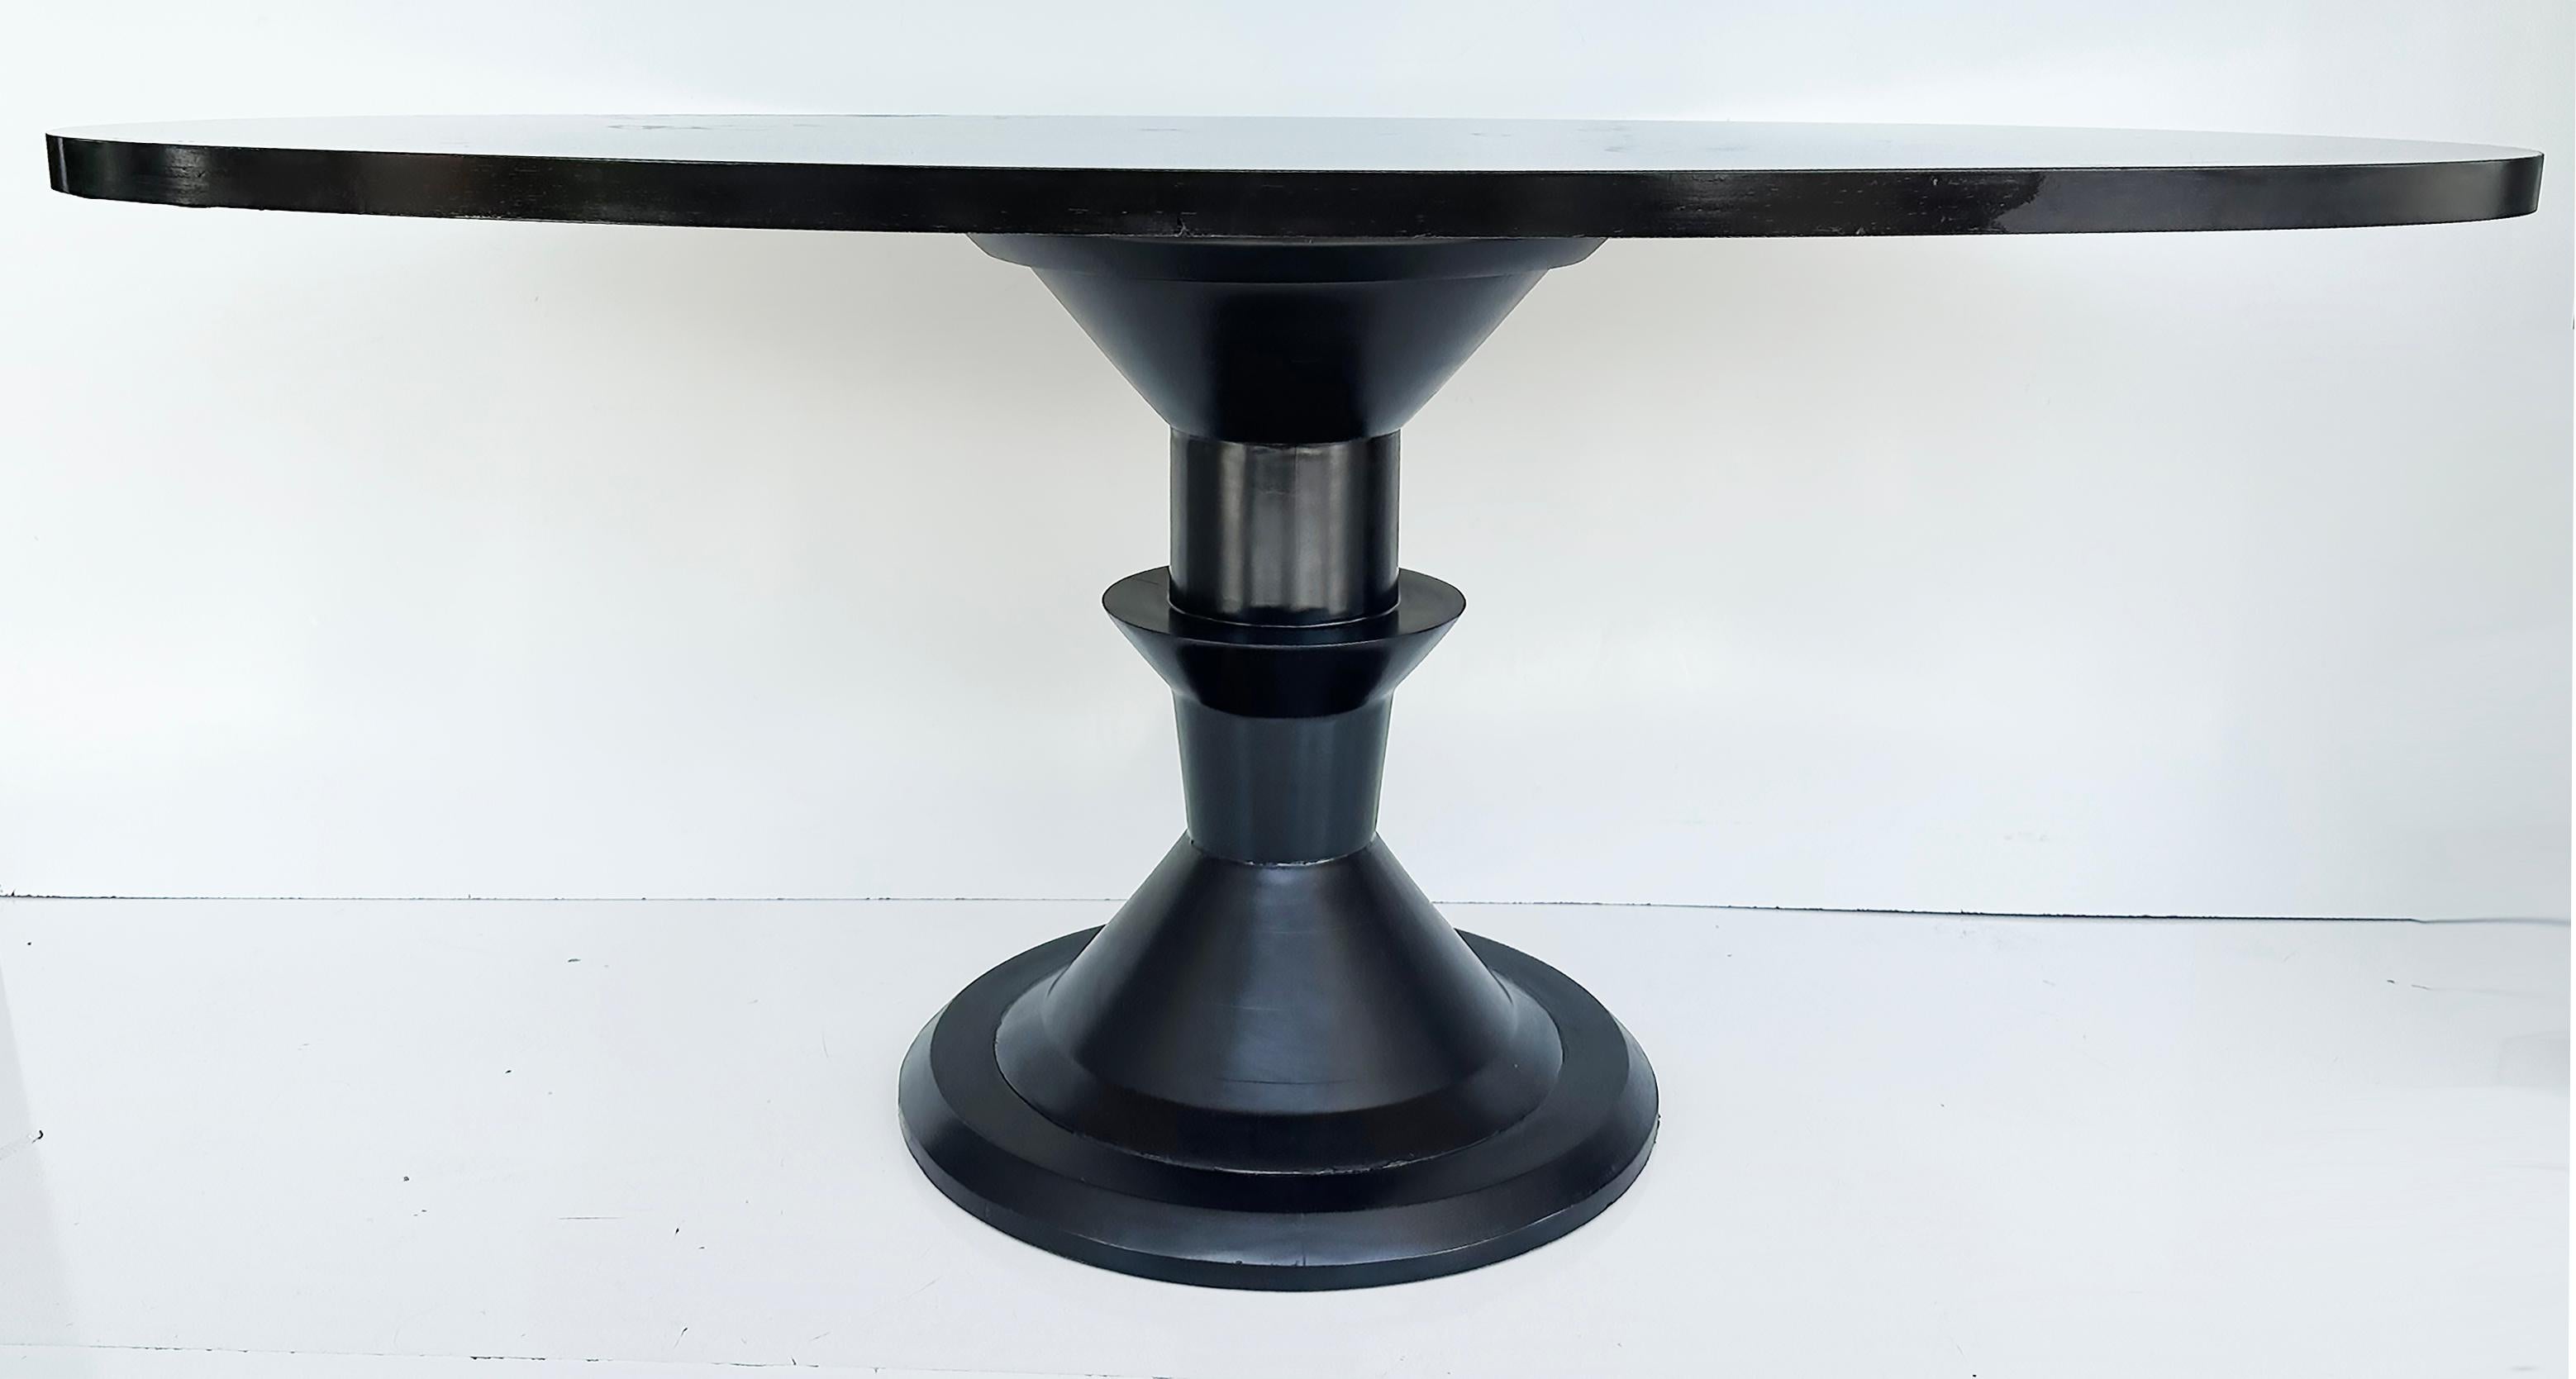 Post-Modern Painted Oval Dining Table with Turned Sculptural Pedestal Base

Offered for sale is a stylish 1980s post-modern oval dining table with a turned wood base. The top is an elongated oval that is long and slender and may be useful in a tight